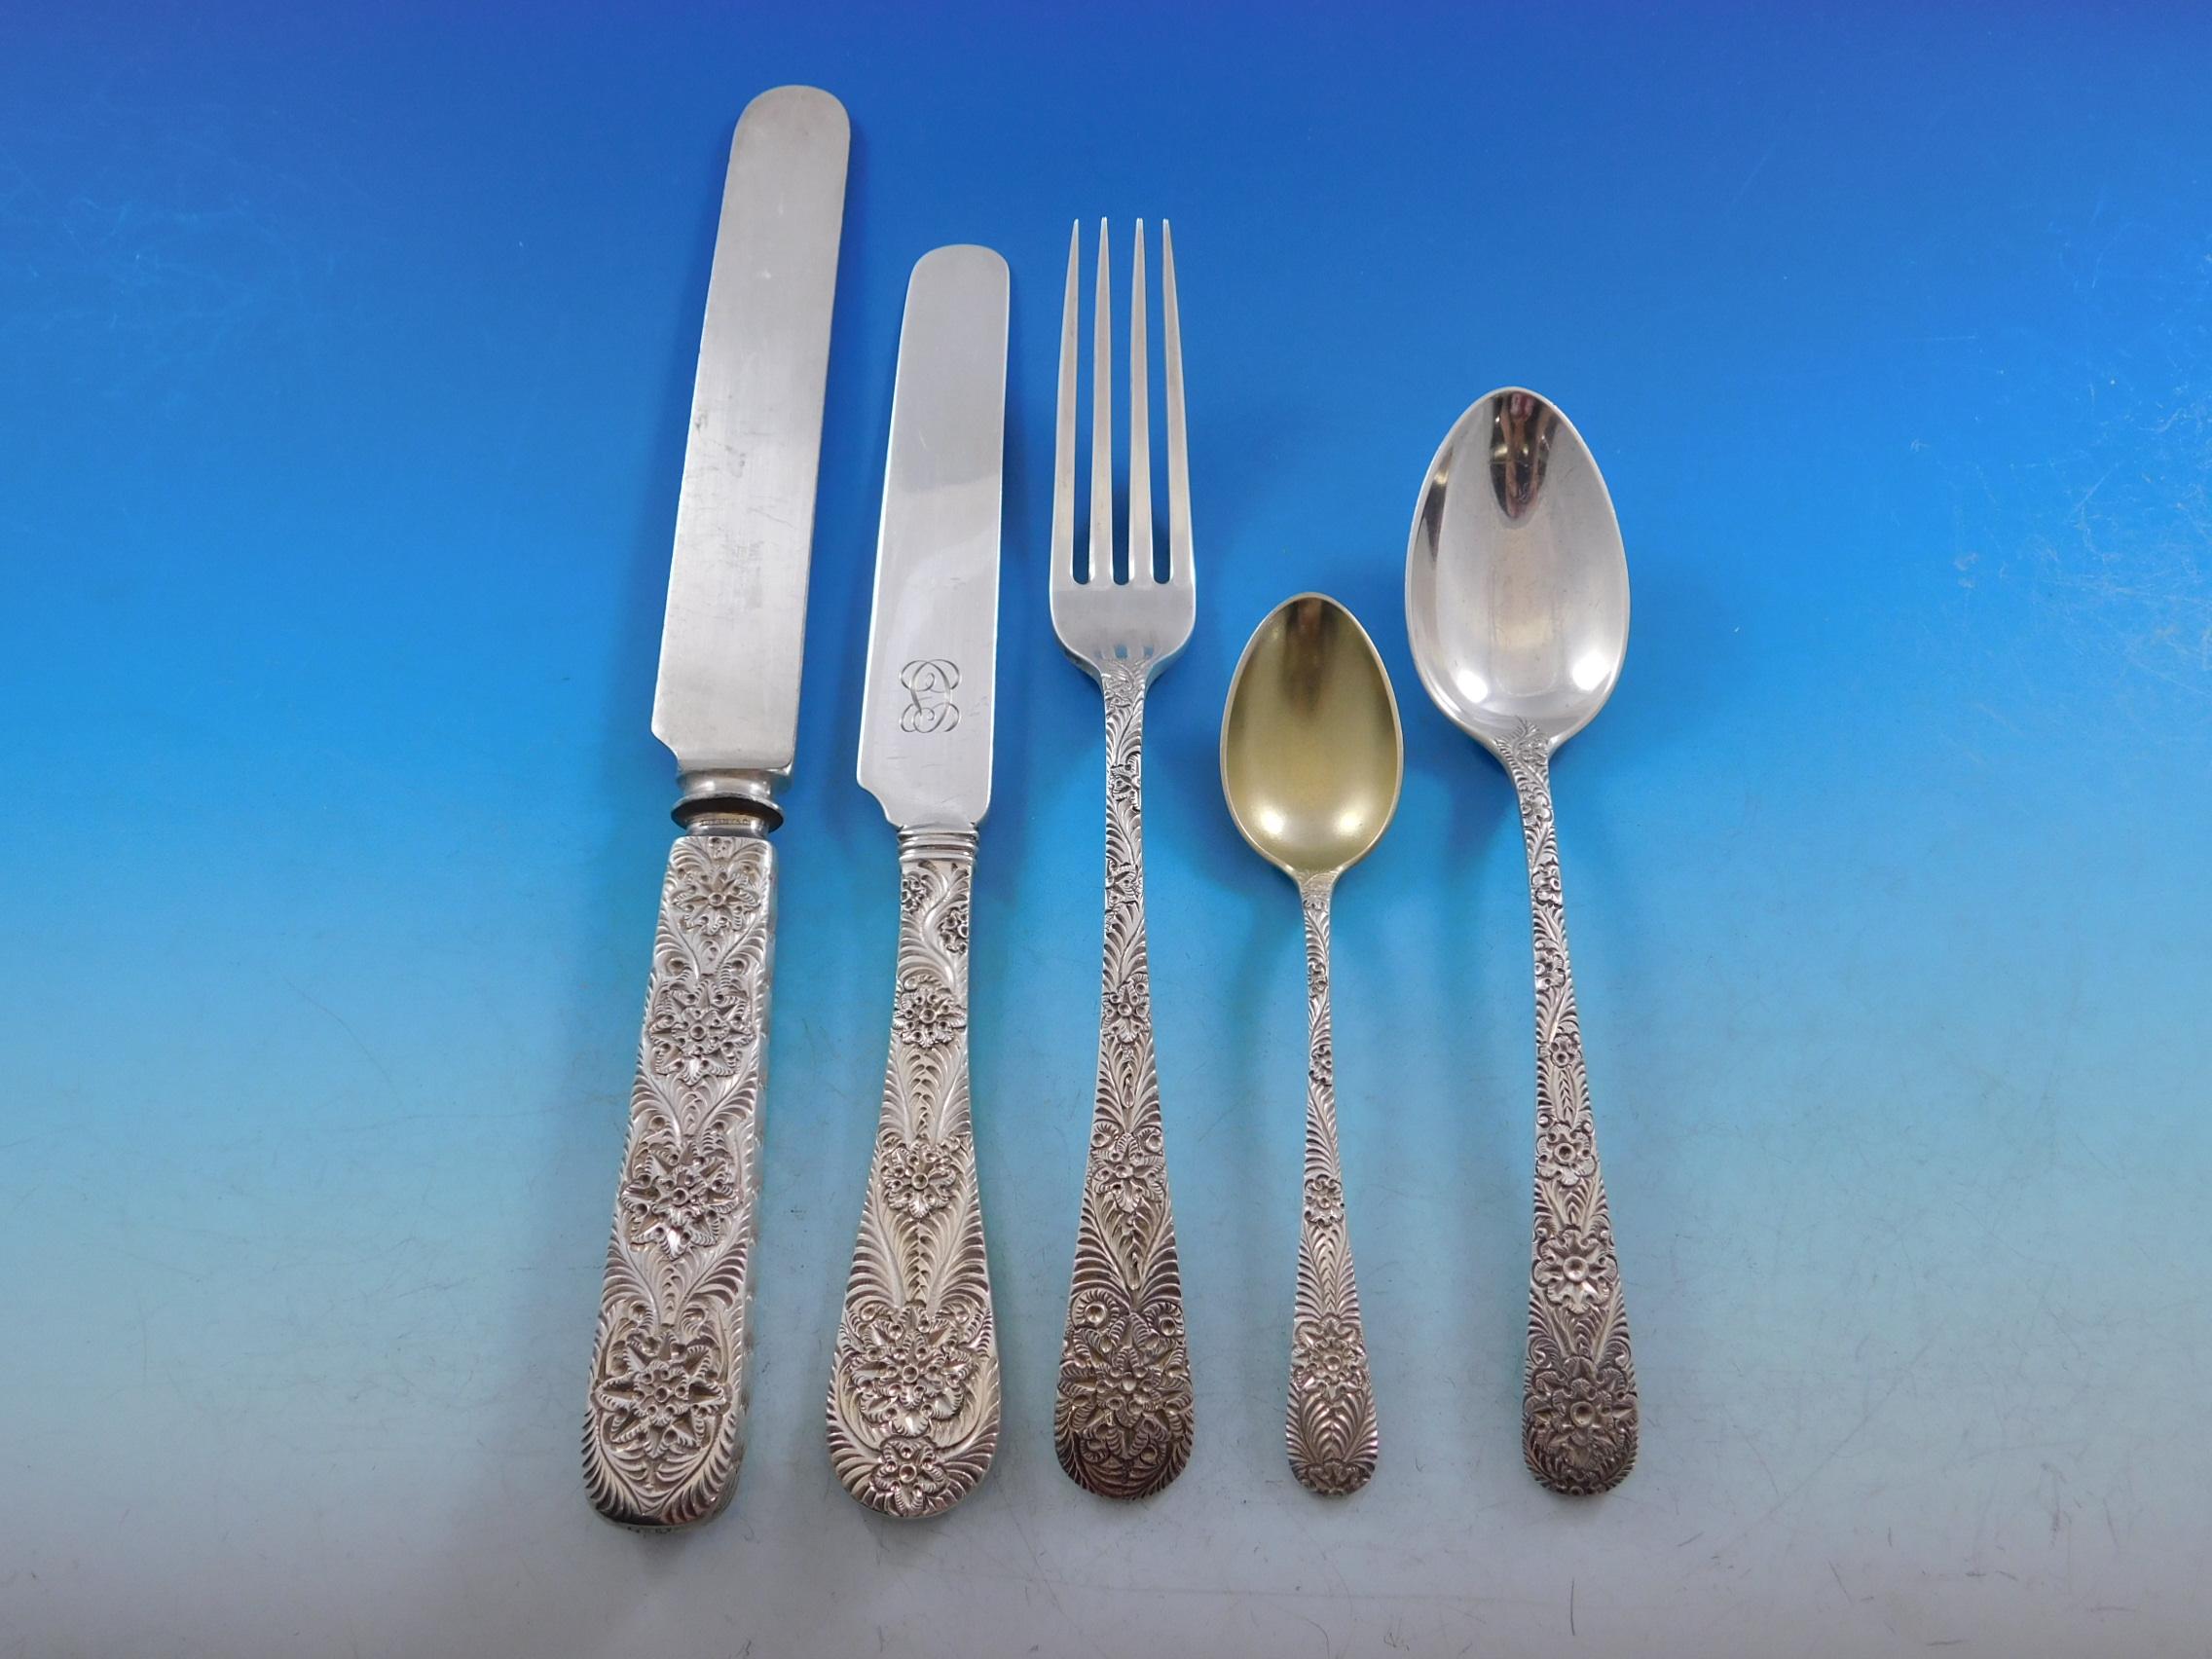 Edward Moore, designer of this pattern, dominated the first era of Tiffany made flatware and designed several full lines of sterling patterns. Moore's father manufactured for Tiffany and upon retirement left Edward Moore in charge at the young age